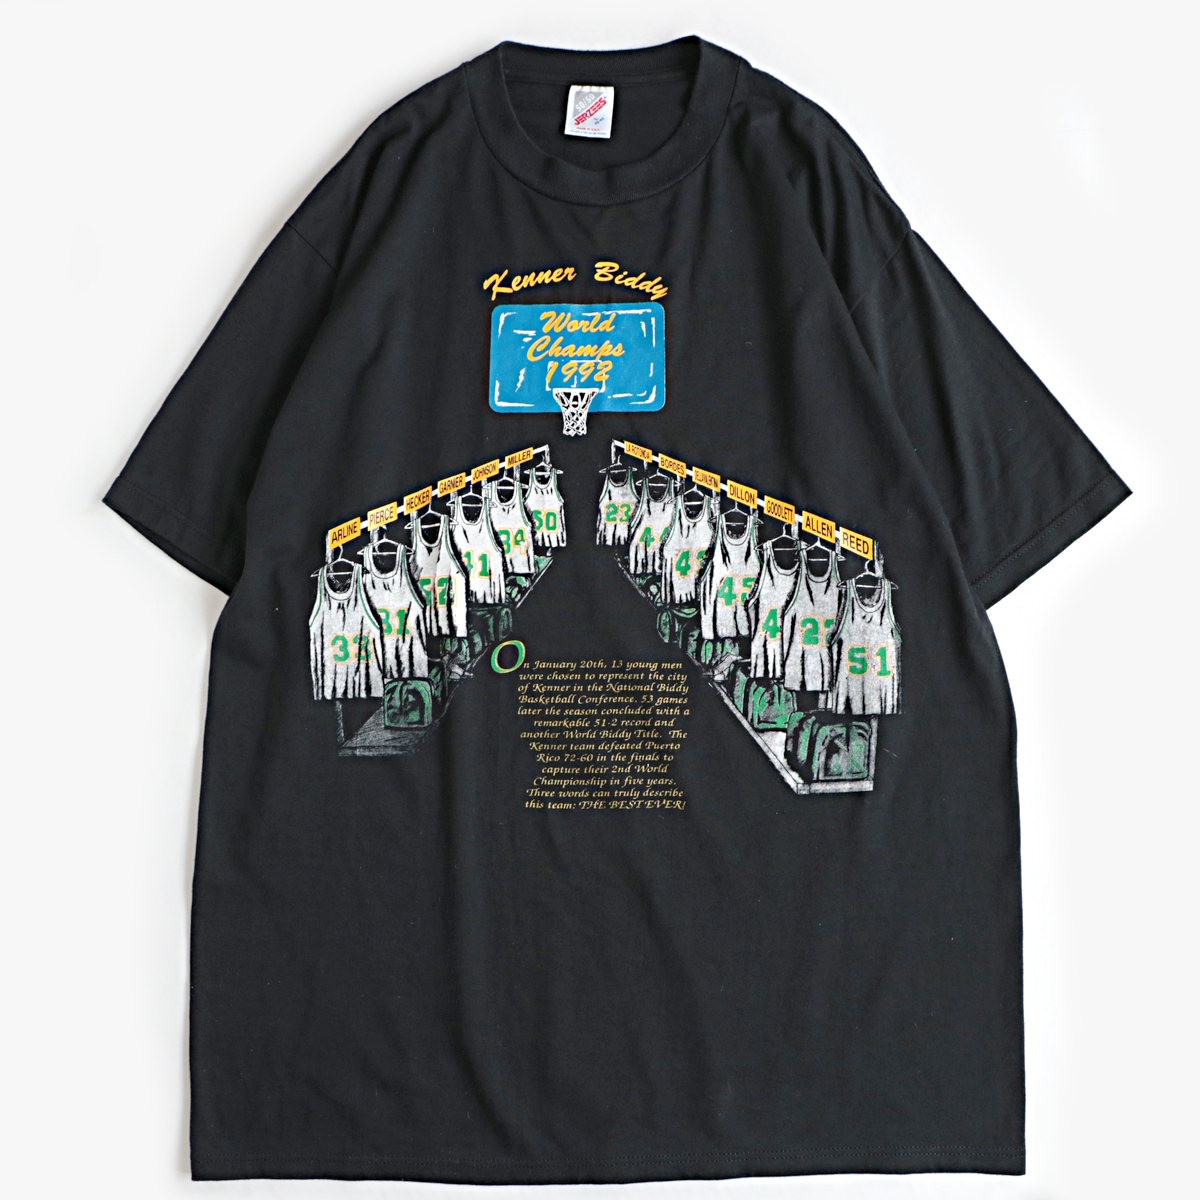 Tシャツ　JERZEES   90s   USA製　プリント